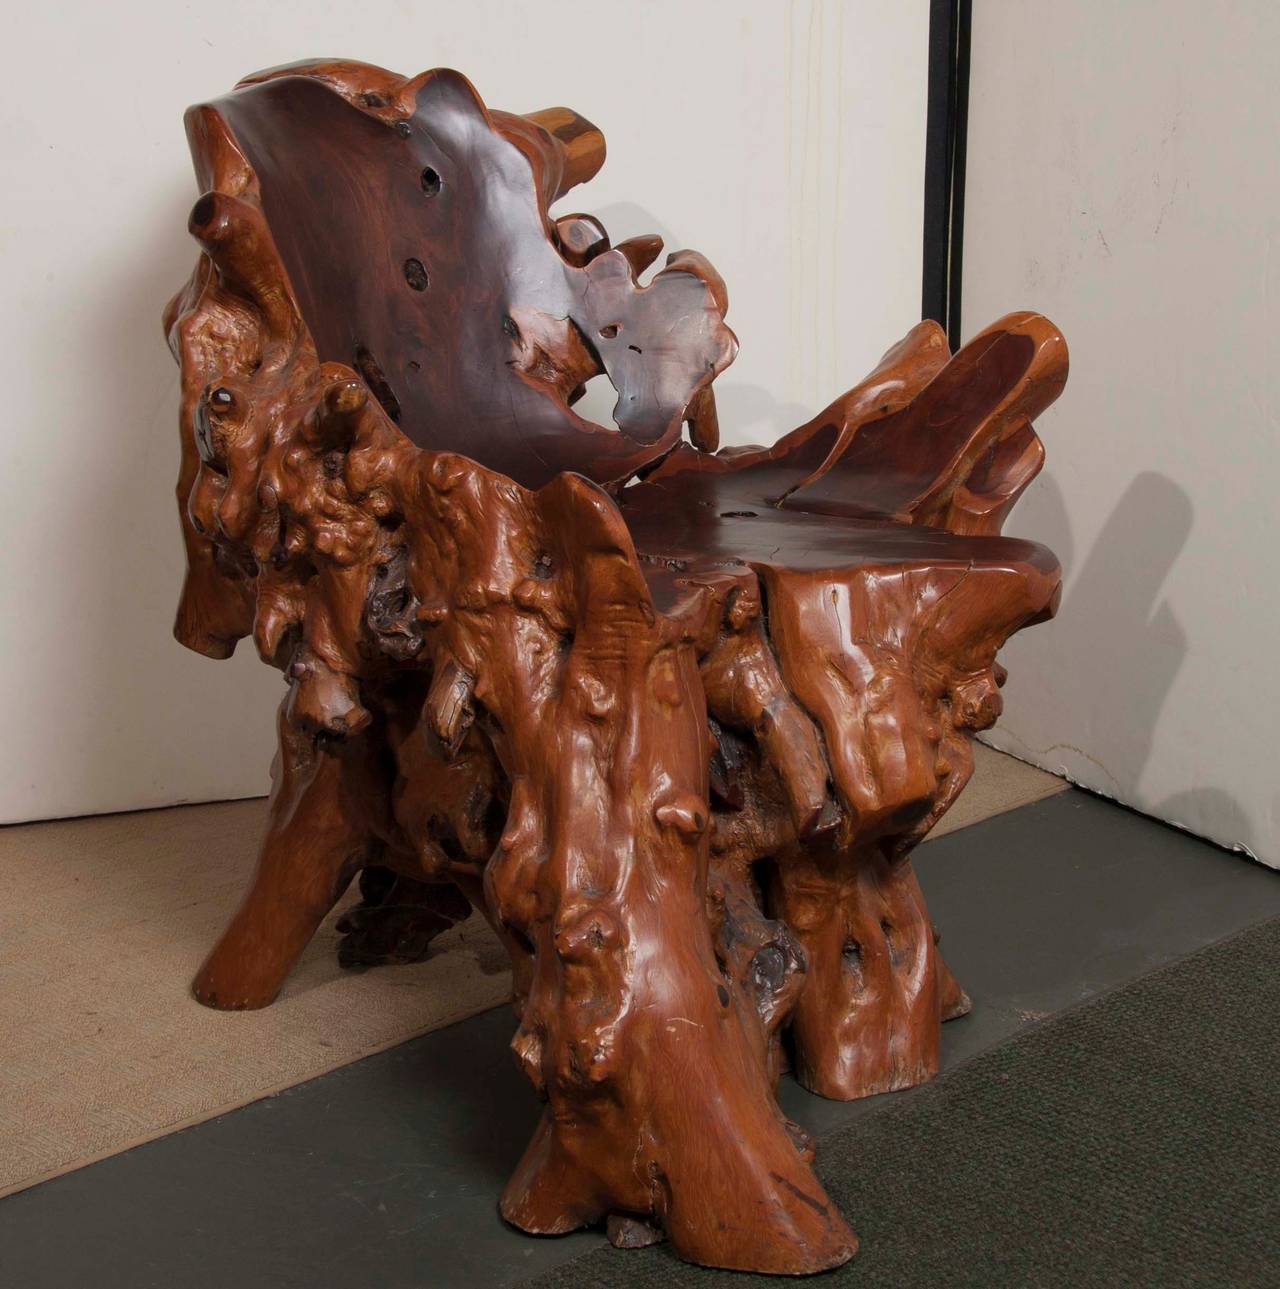 An Asian burled wood or root chair, formed in a naturalistic shape.